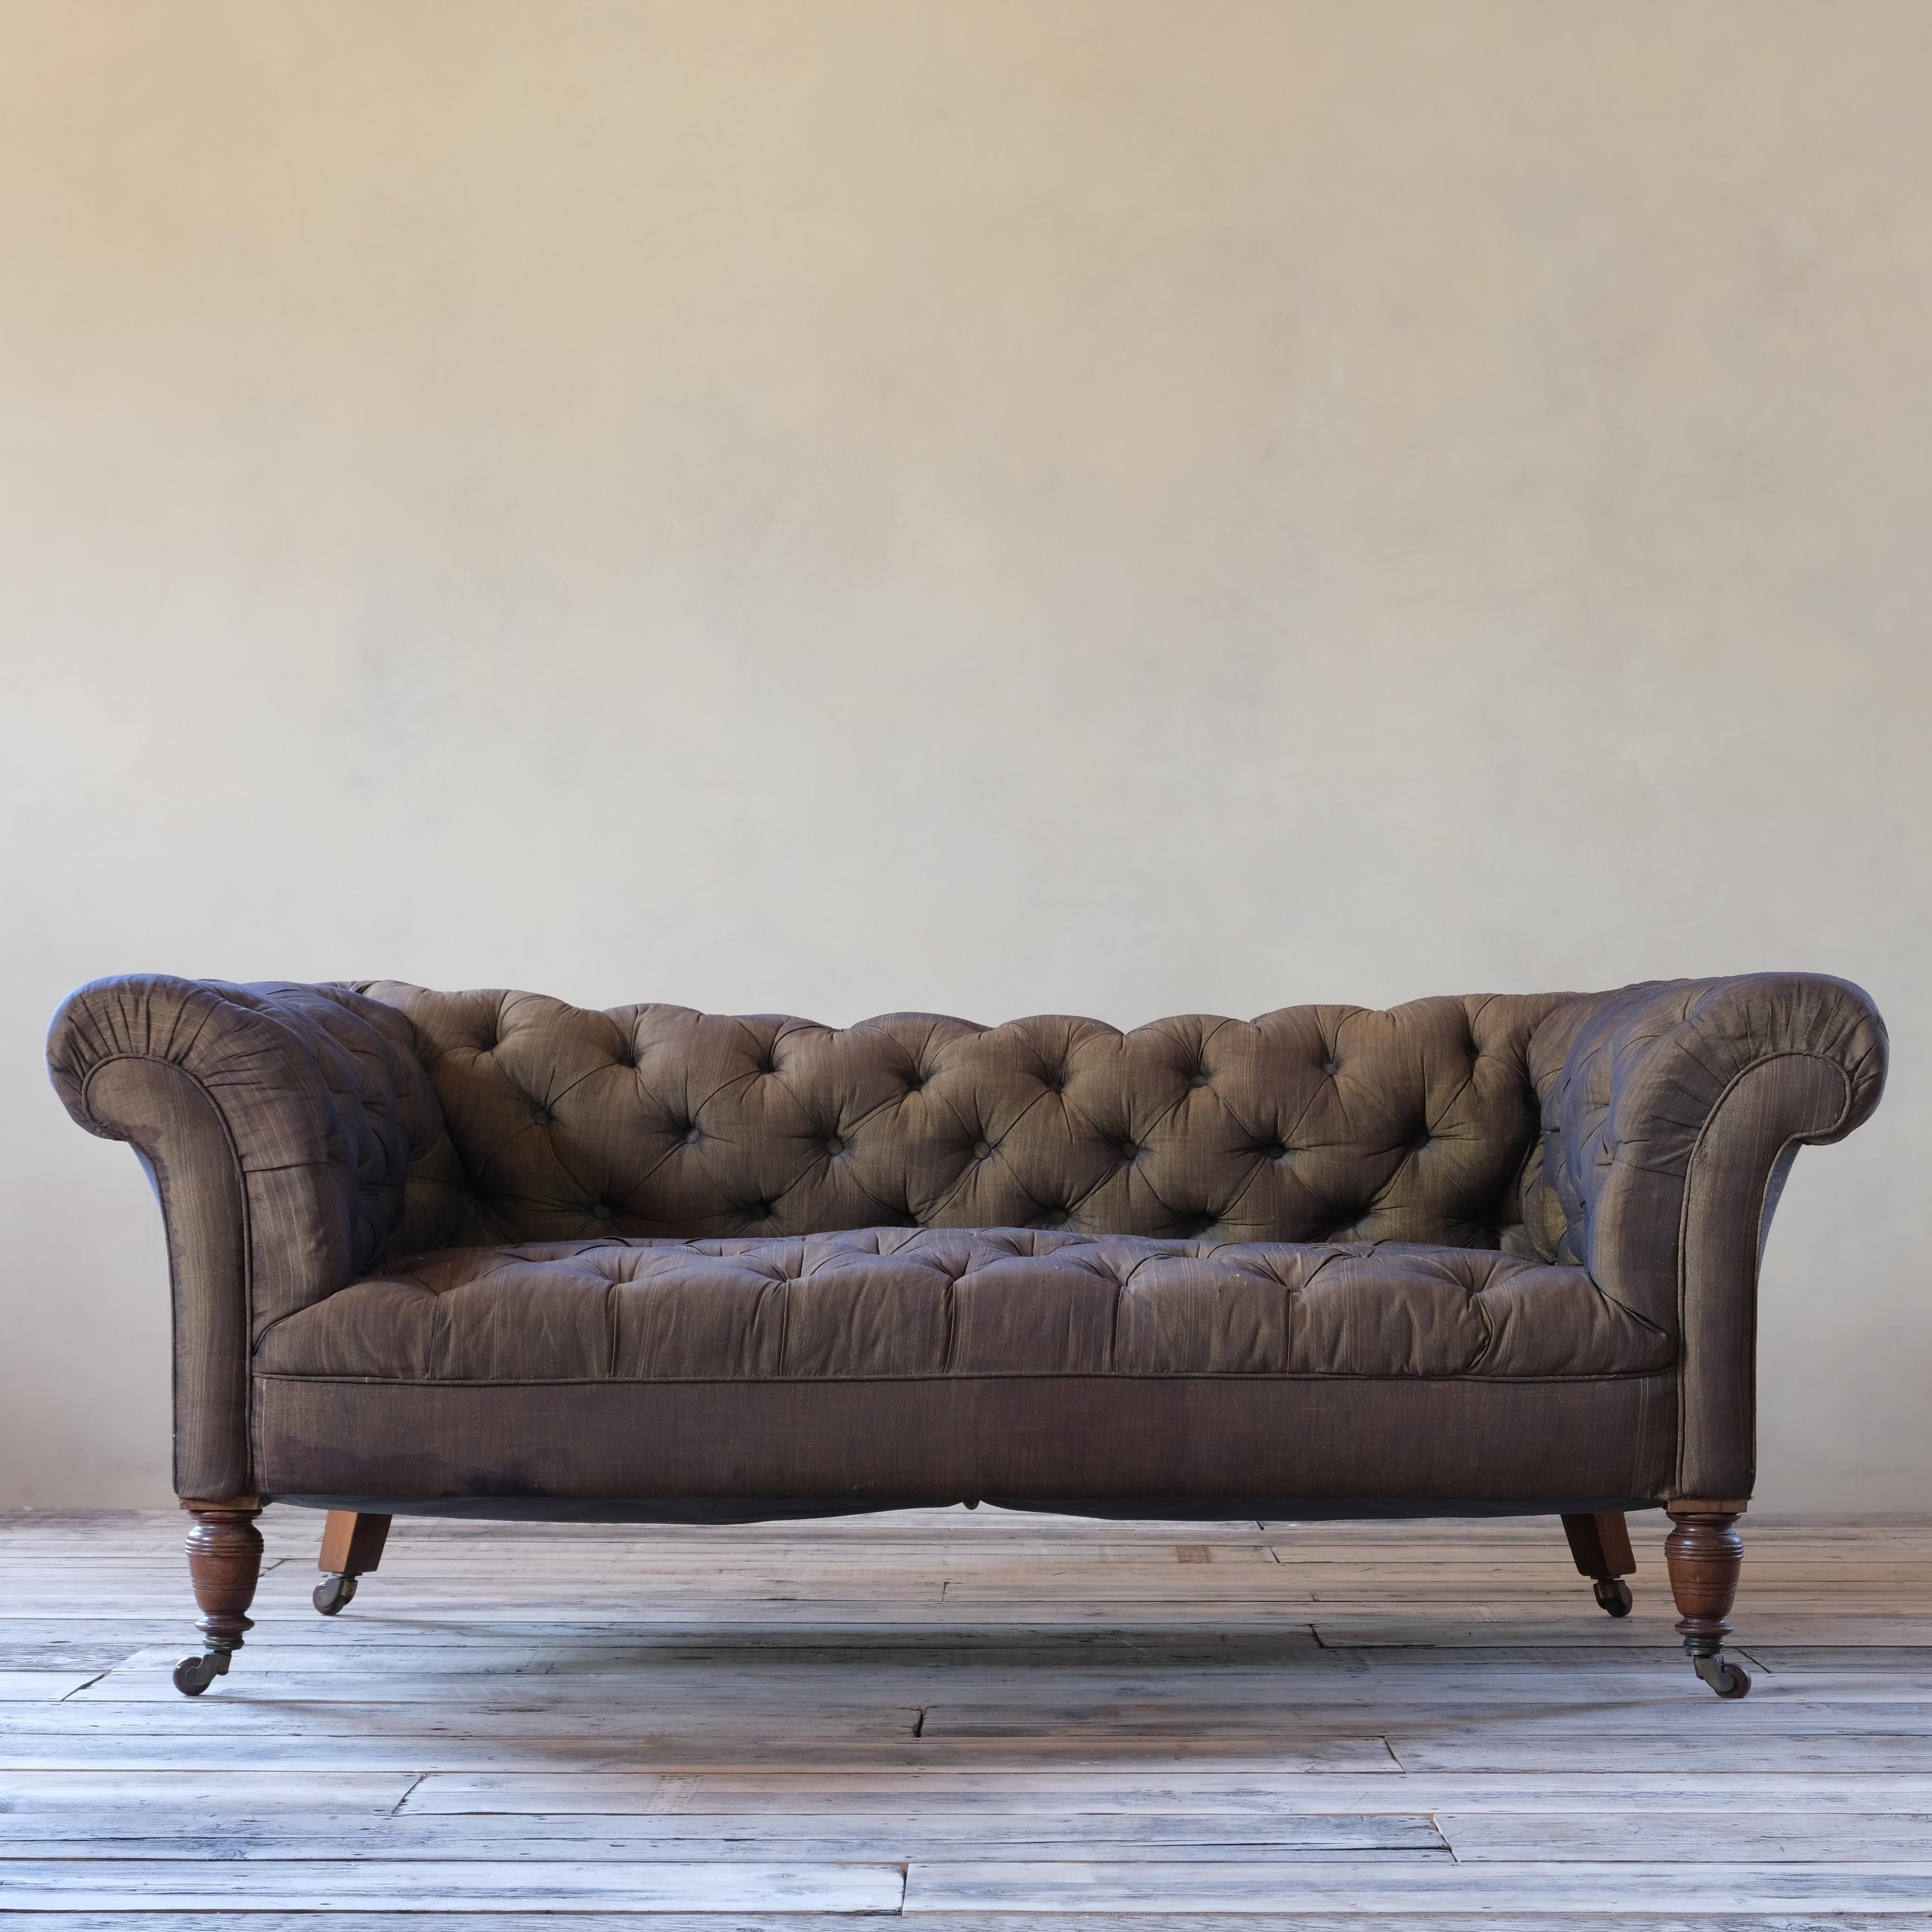 Victorian 19th Century Chesterfield Sofa by Hampton and Sons, London